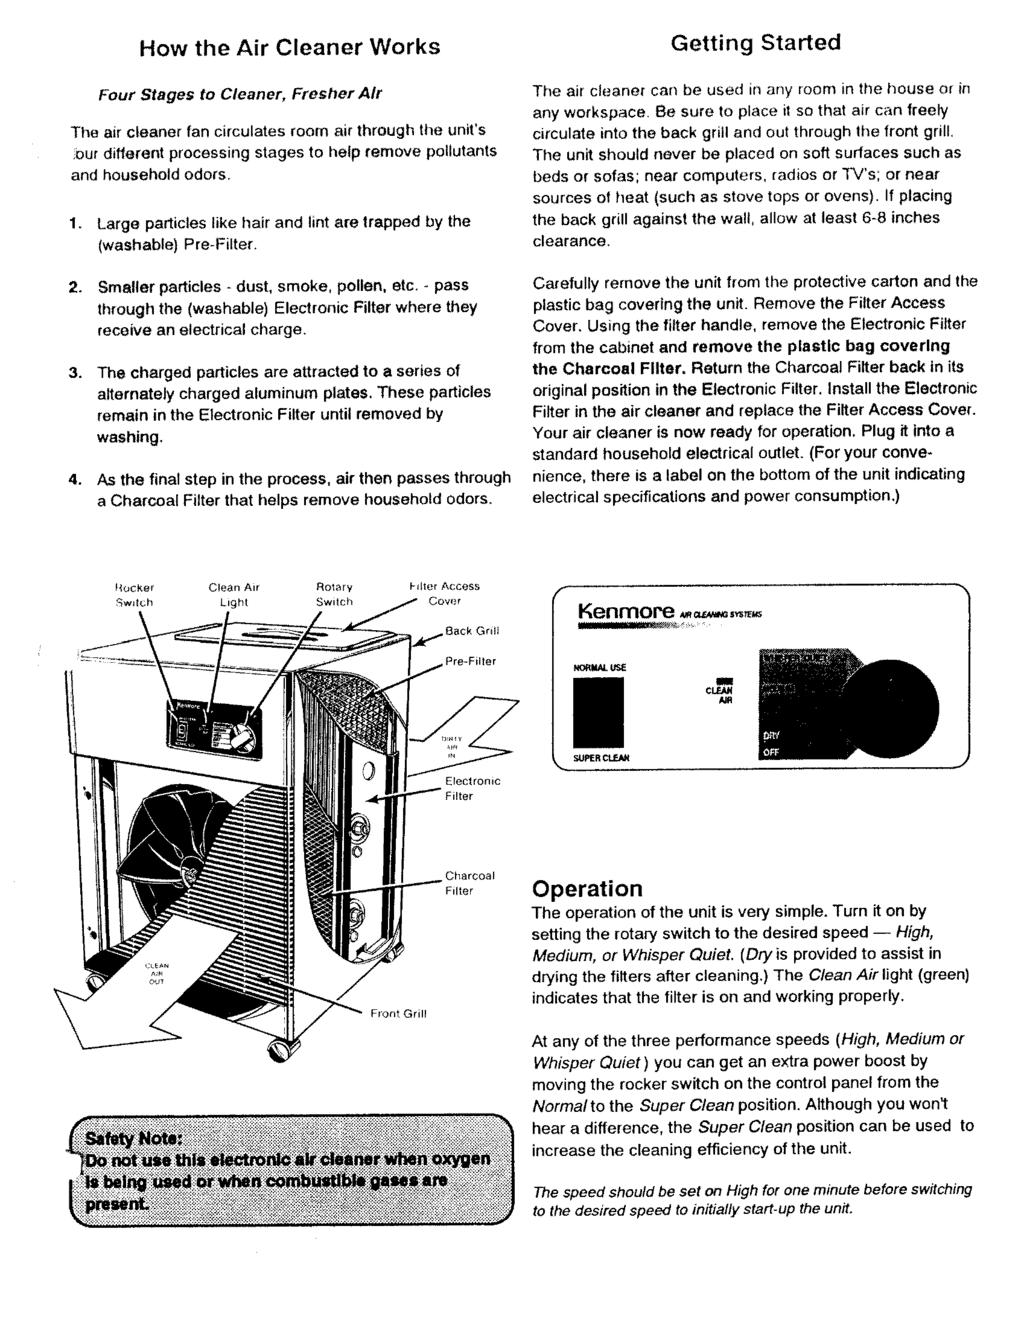 How the Air Cleaner Works Getting Started Four Stages to Cleaner, Fresher Air The air cleaner fan circulates room air through tl_e unit's Our different processing stages to help remove pollutants and